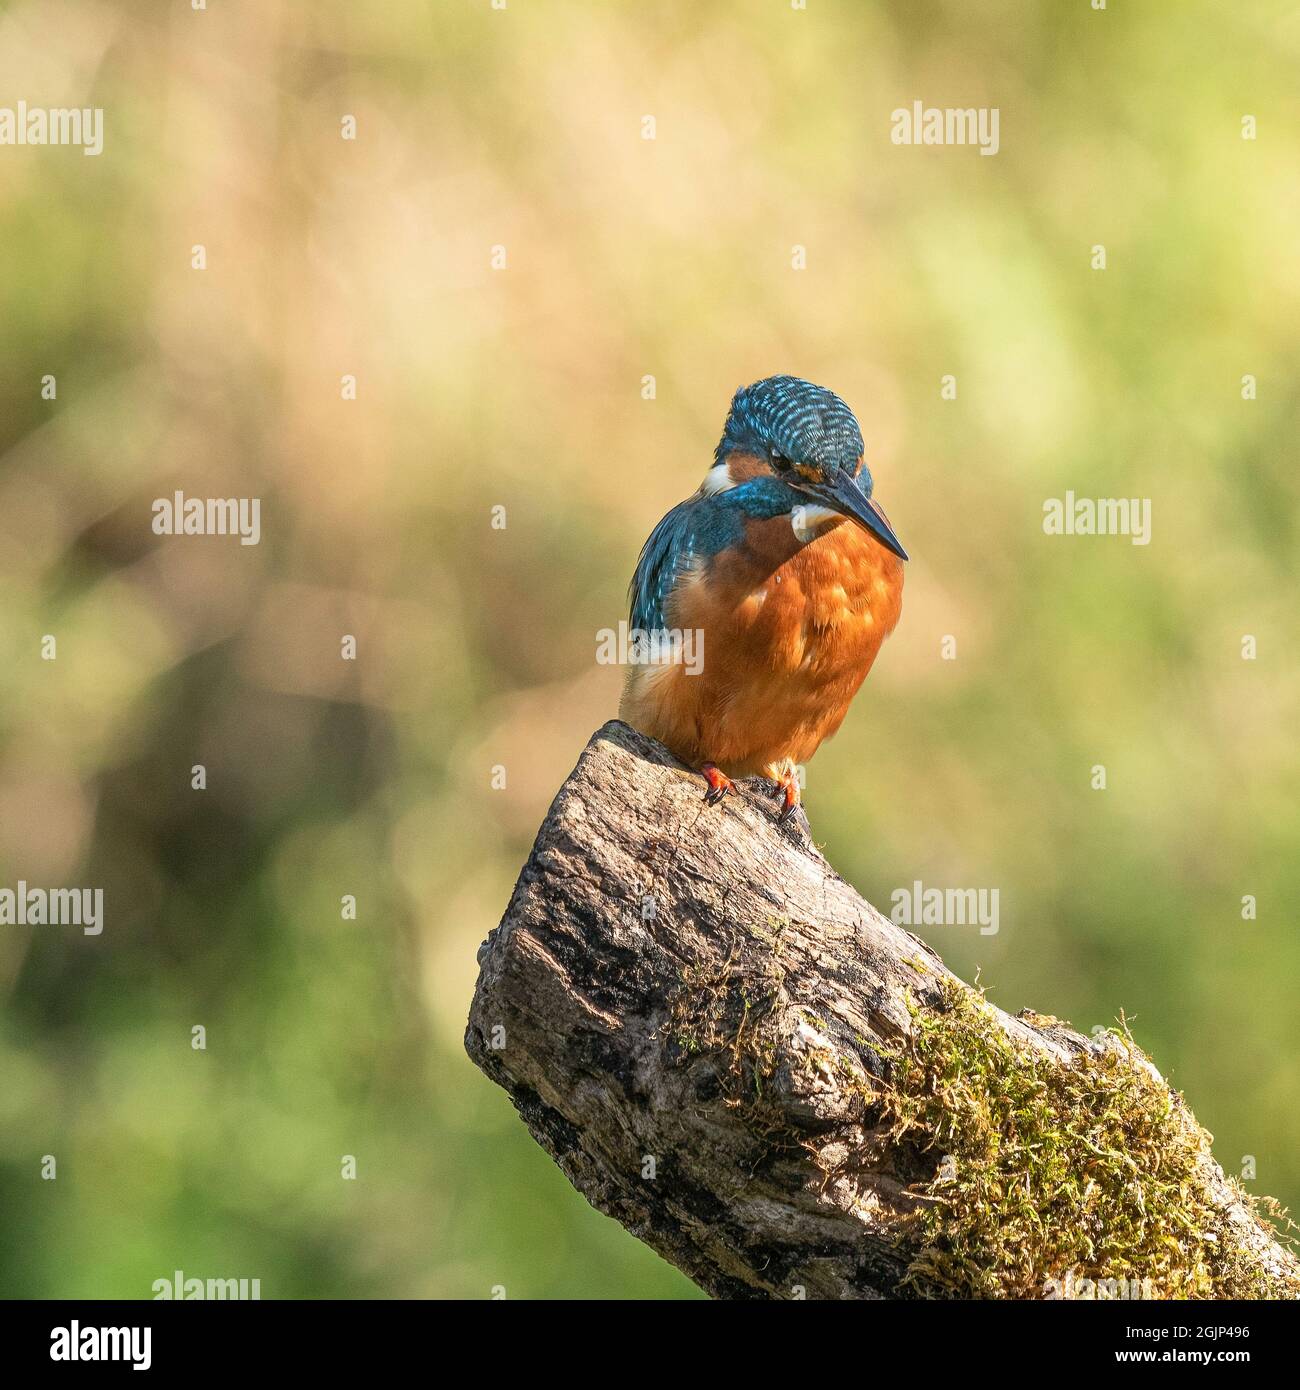 Kingfisher perched on log waiting to dive into water. Stock Photo